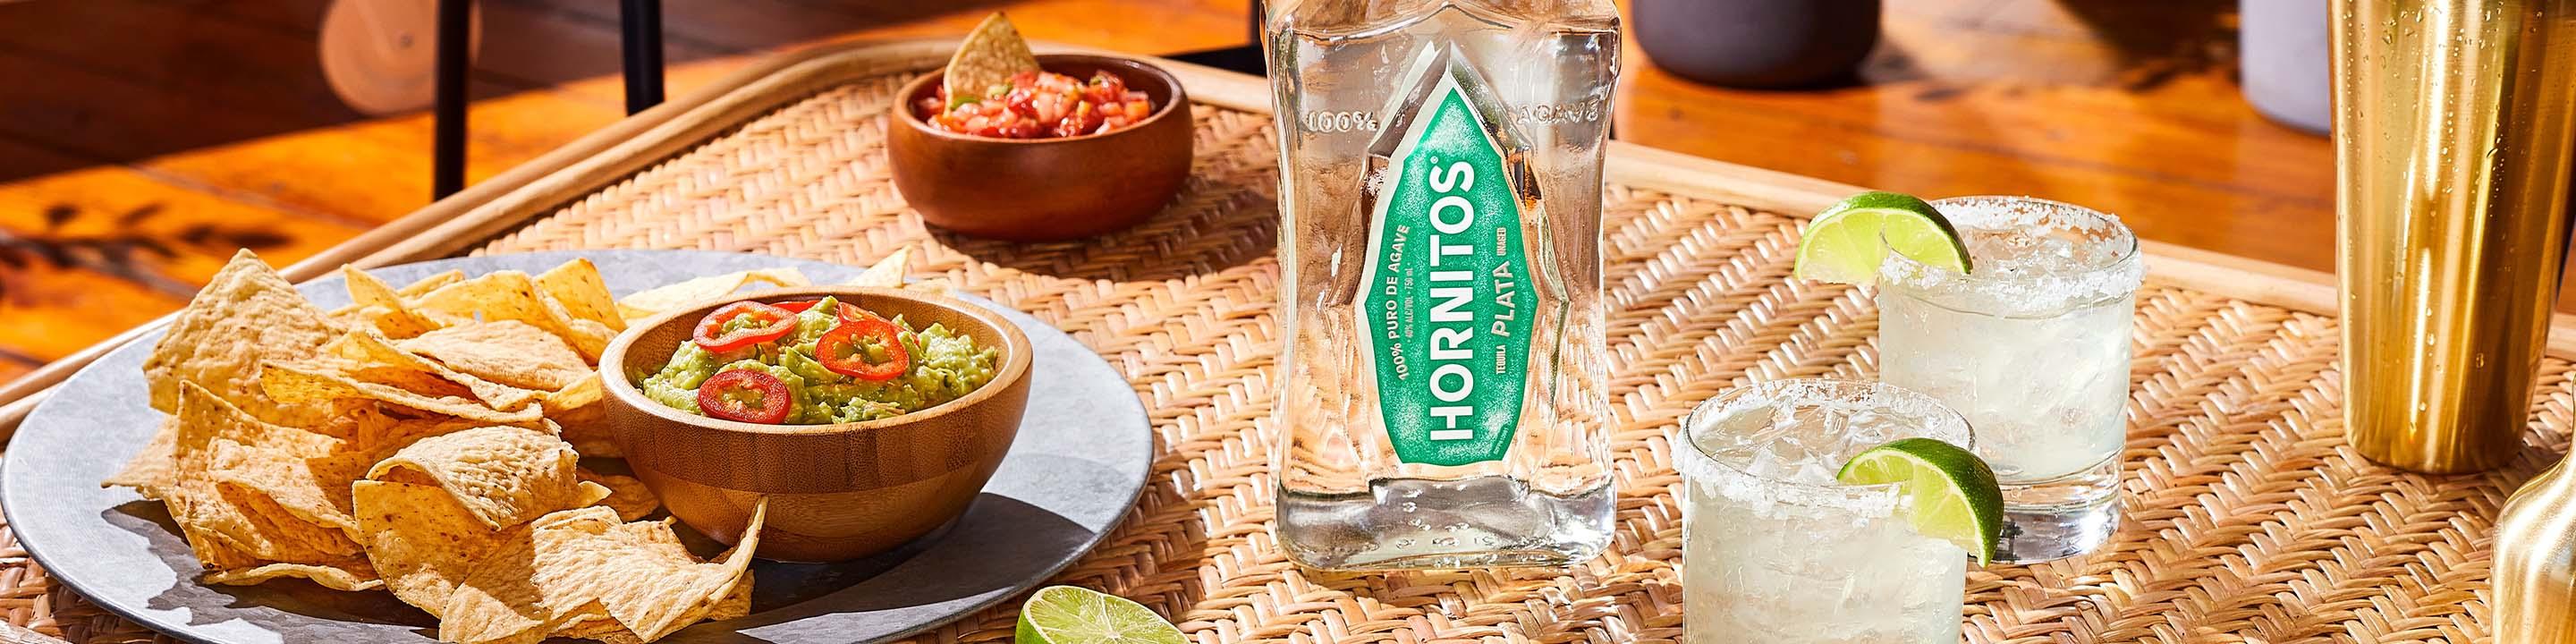 Hailing from Tequila, Jalisco in Mexico, Hornitos Tequila (named after the “little ovens” used to roast agave) was introduced to the world in 1950 by founder Don Francisco Javier Sauza in honor of Mexican Independence Day.

Buy Hornitos online now from nearby liquor stores via Minibar Delivery.